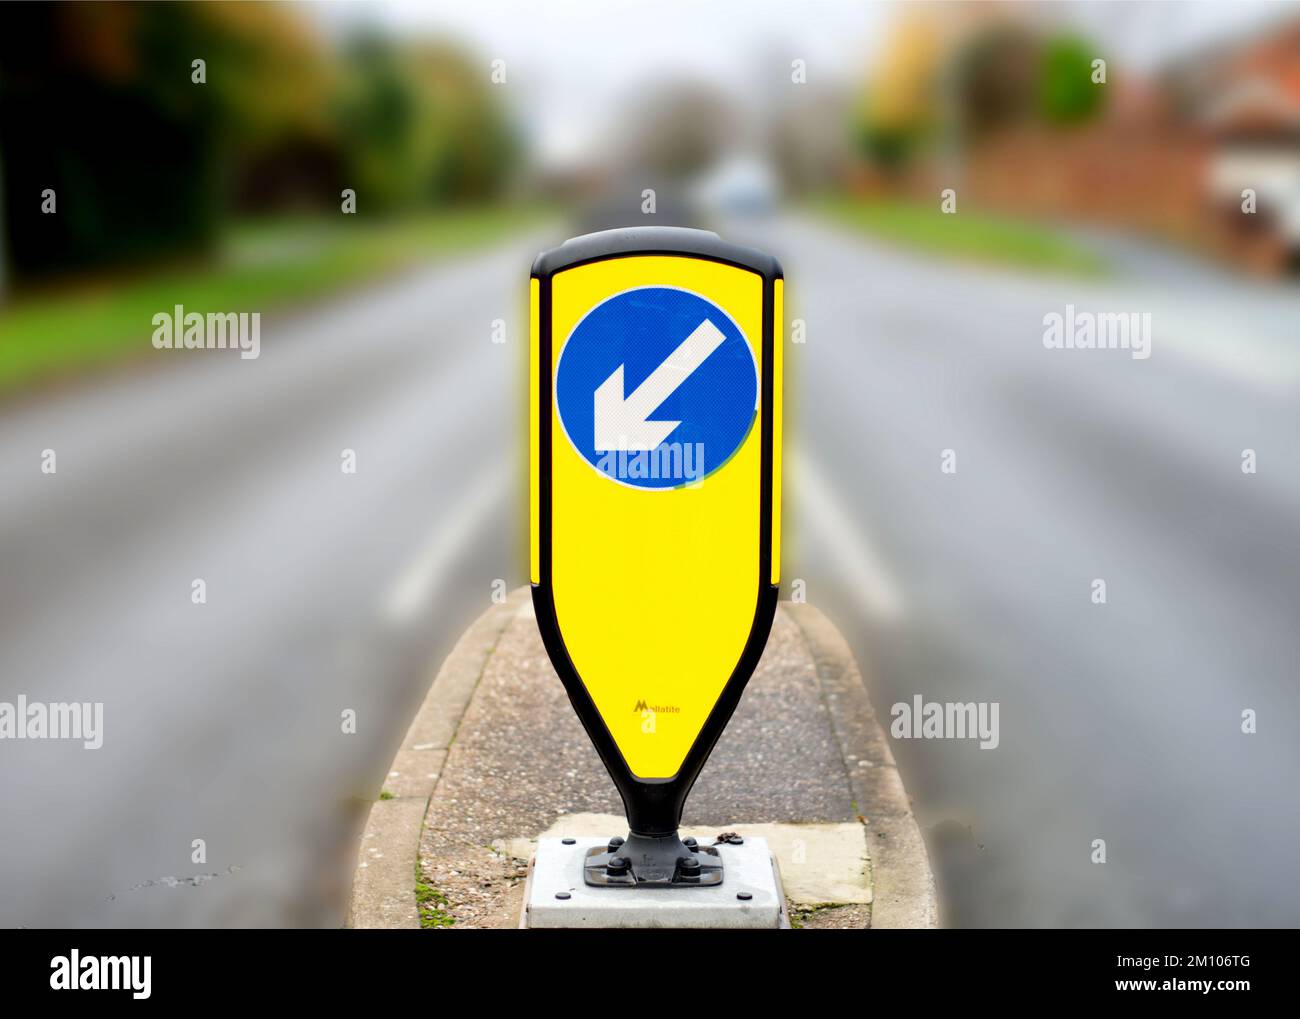 A keep left road sign on a central reservation island Stock Photo